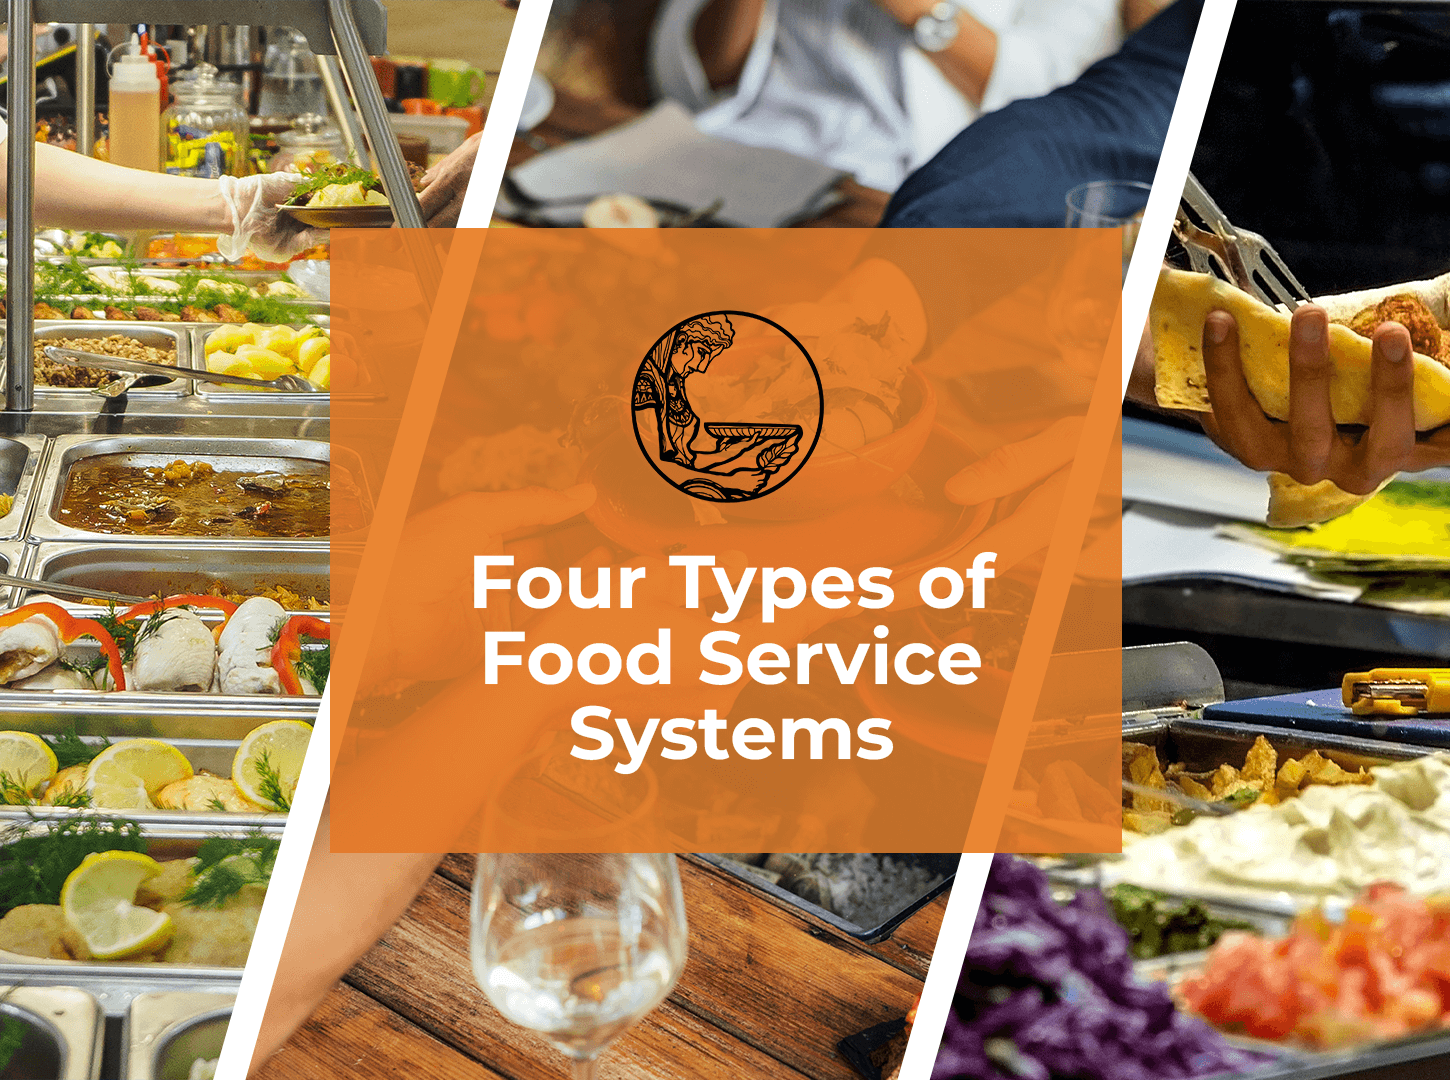 Food Service Systems